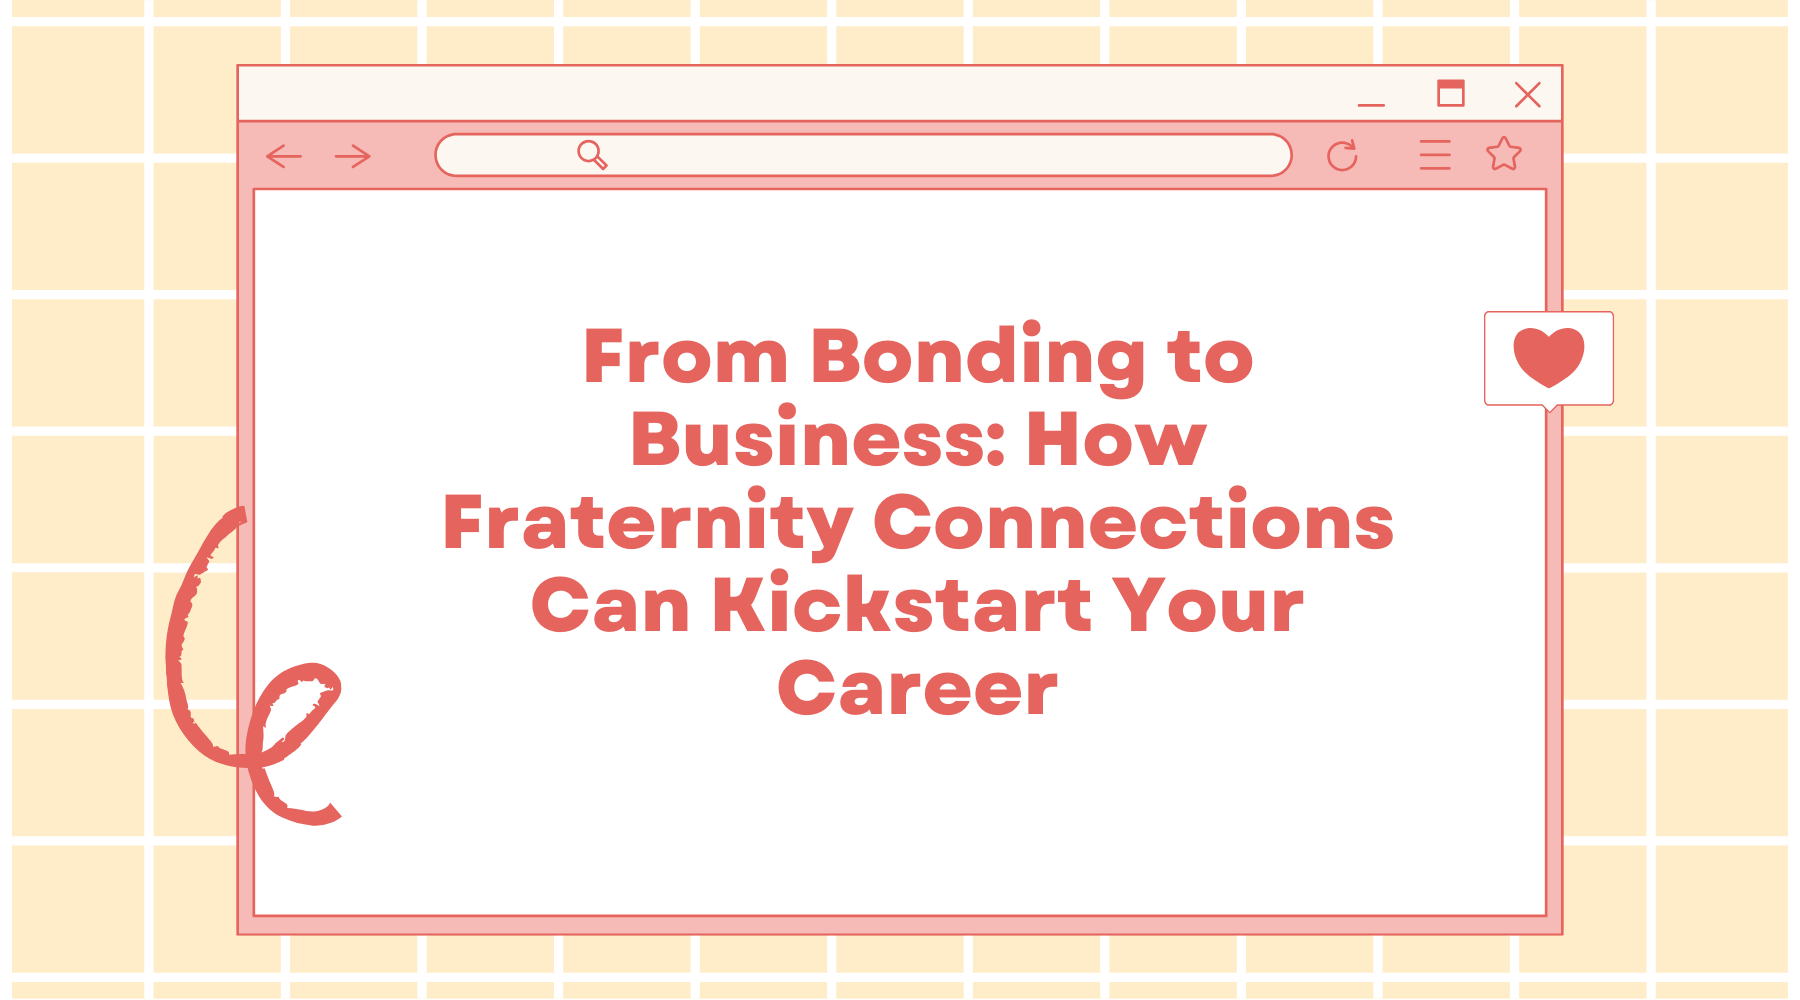 From Bonding to Business: How Fraternity Connections Can Kickstart Your Career